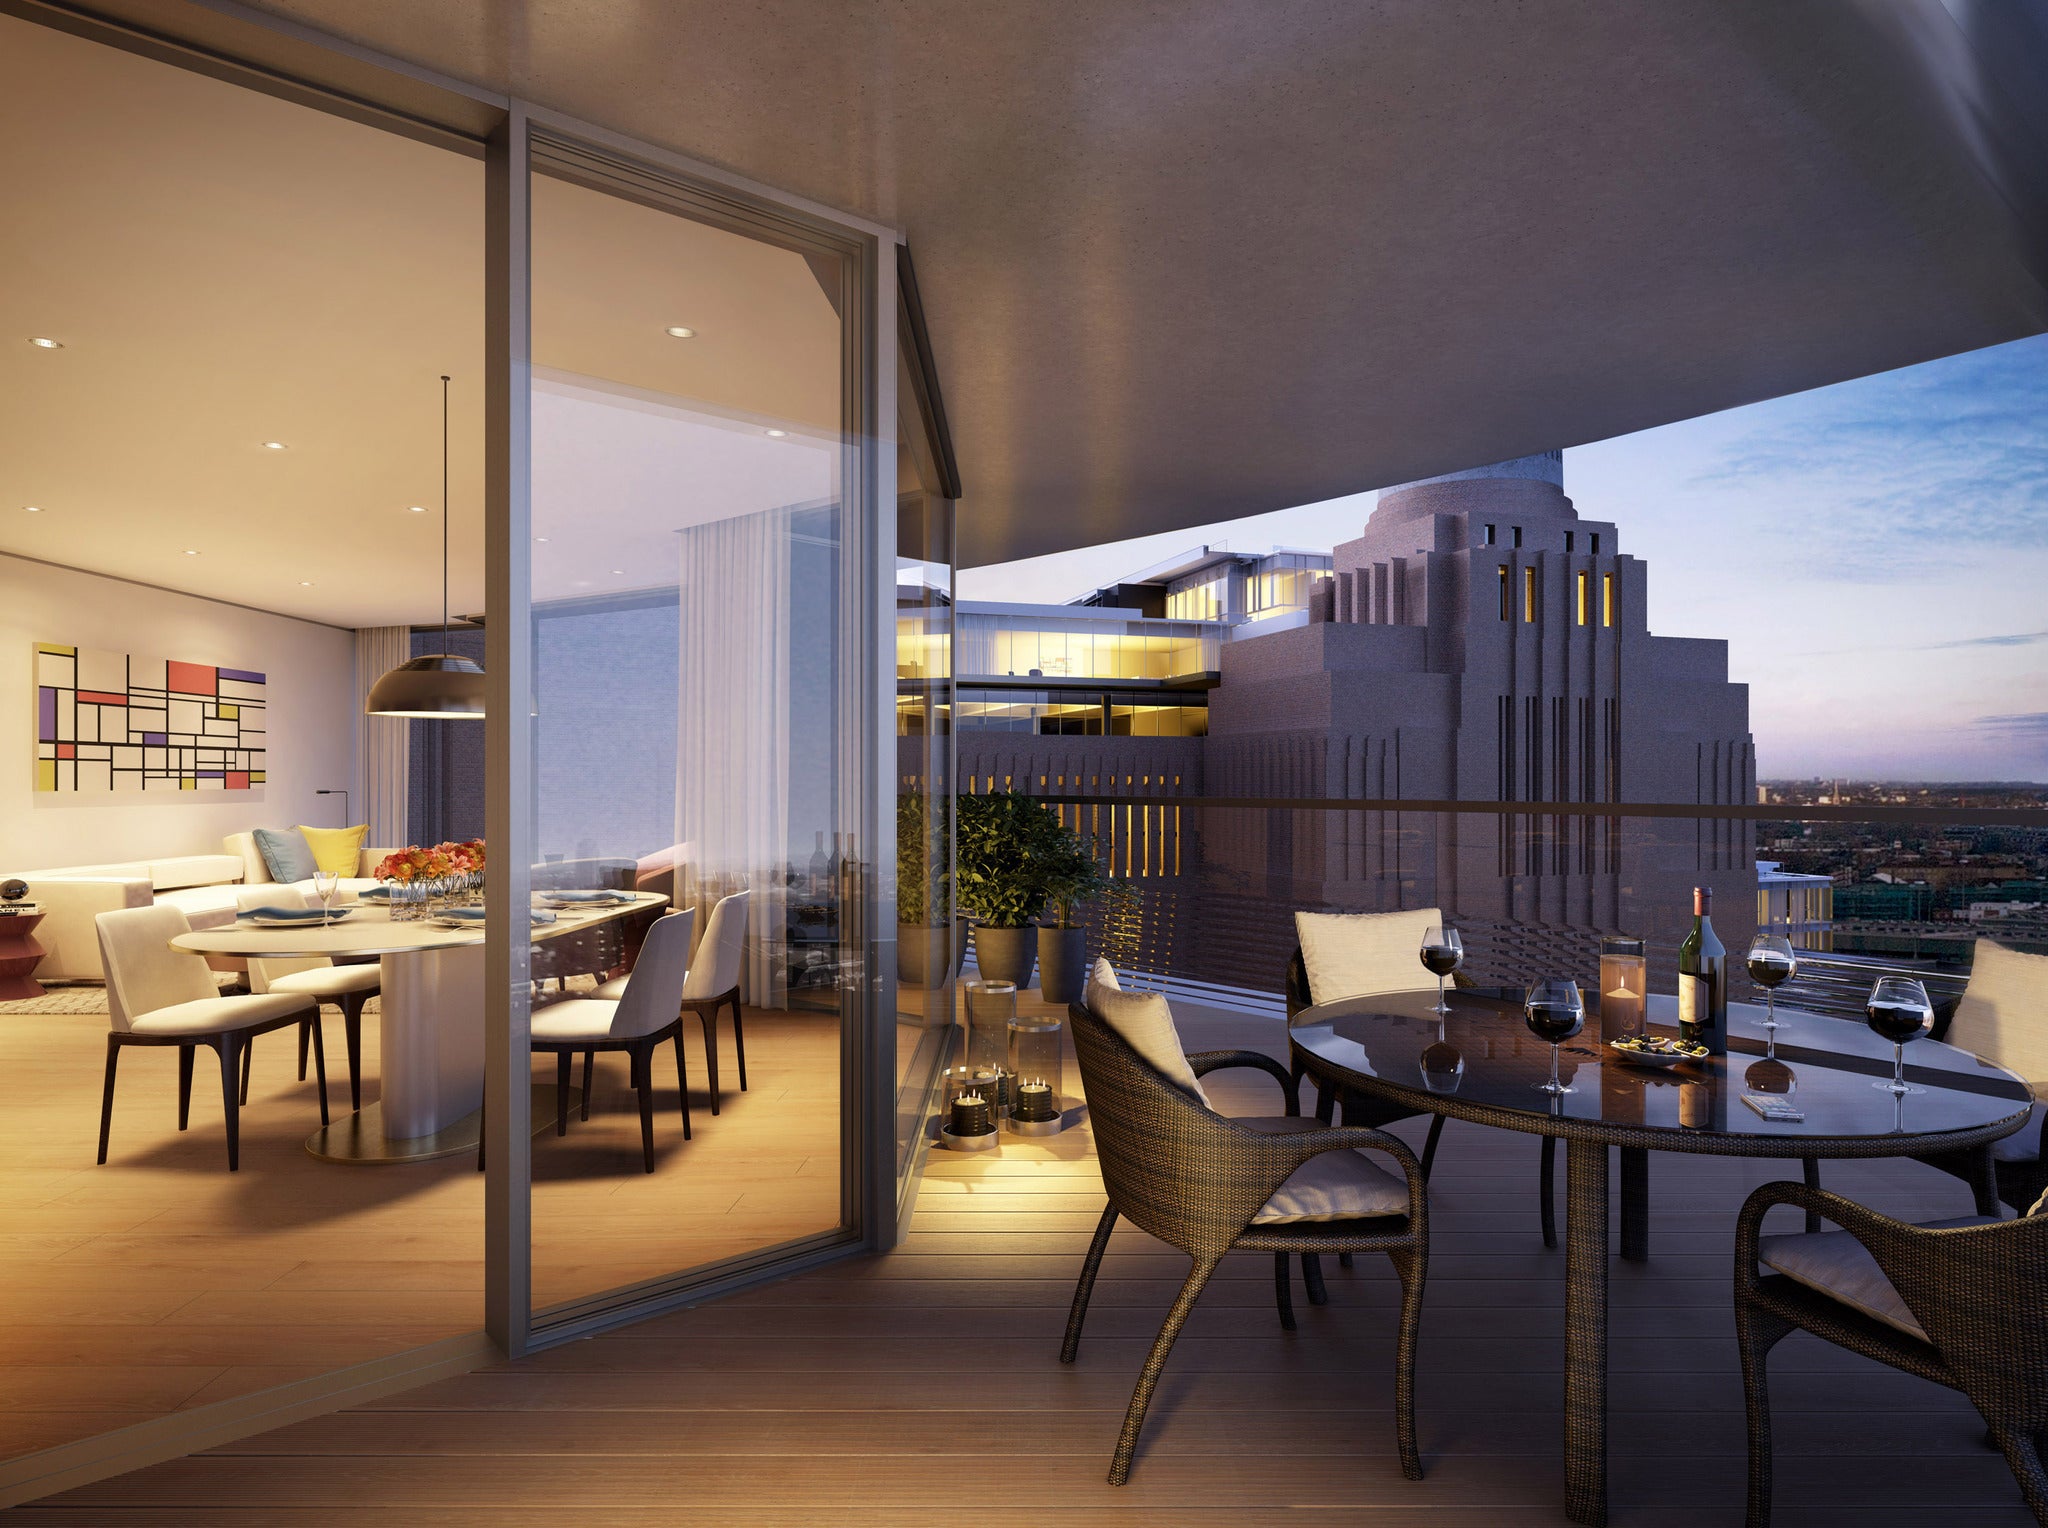 Hundreds of apartments in Battersea Power Station are soon to go on sale